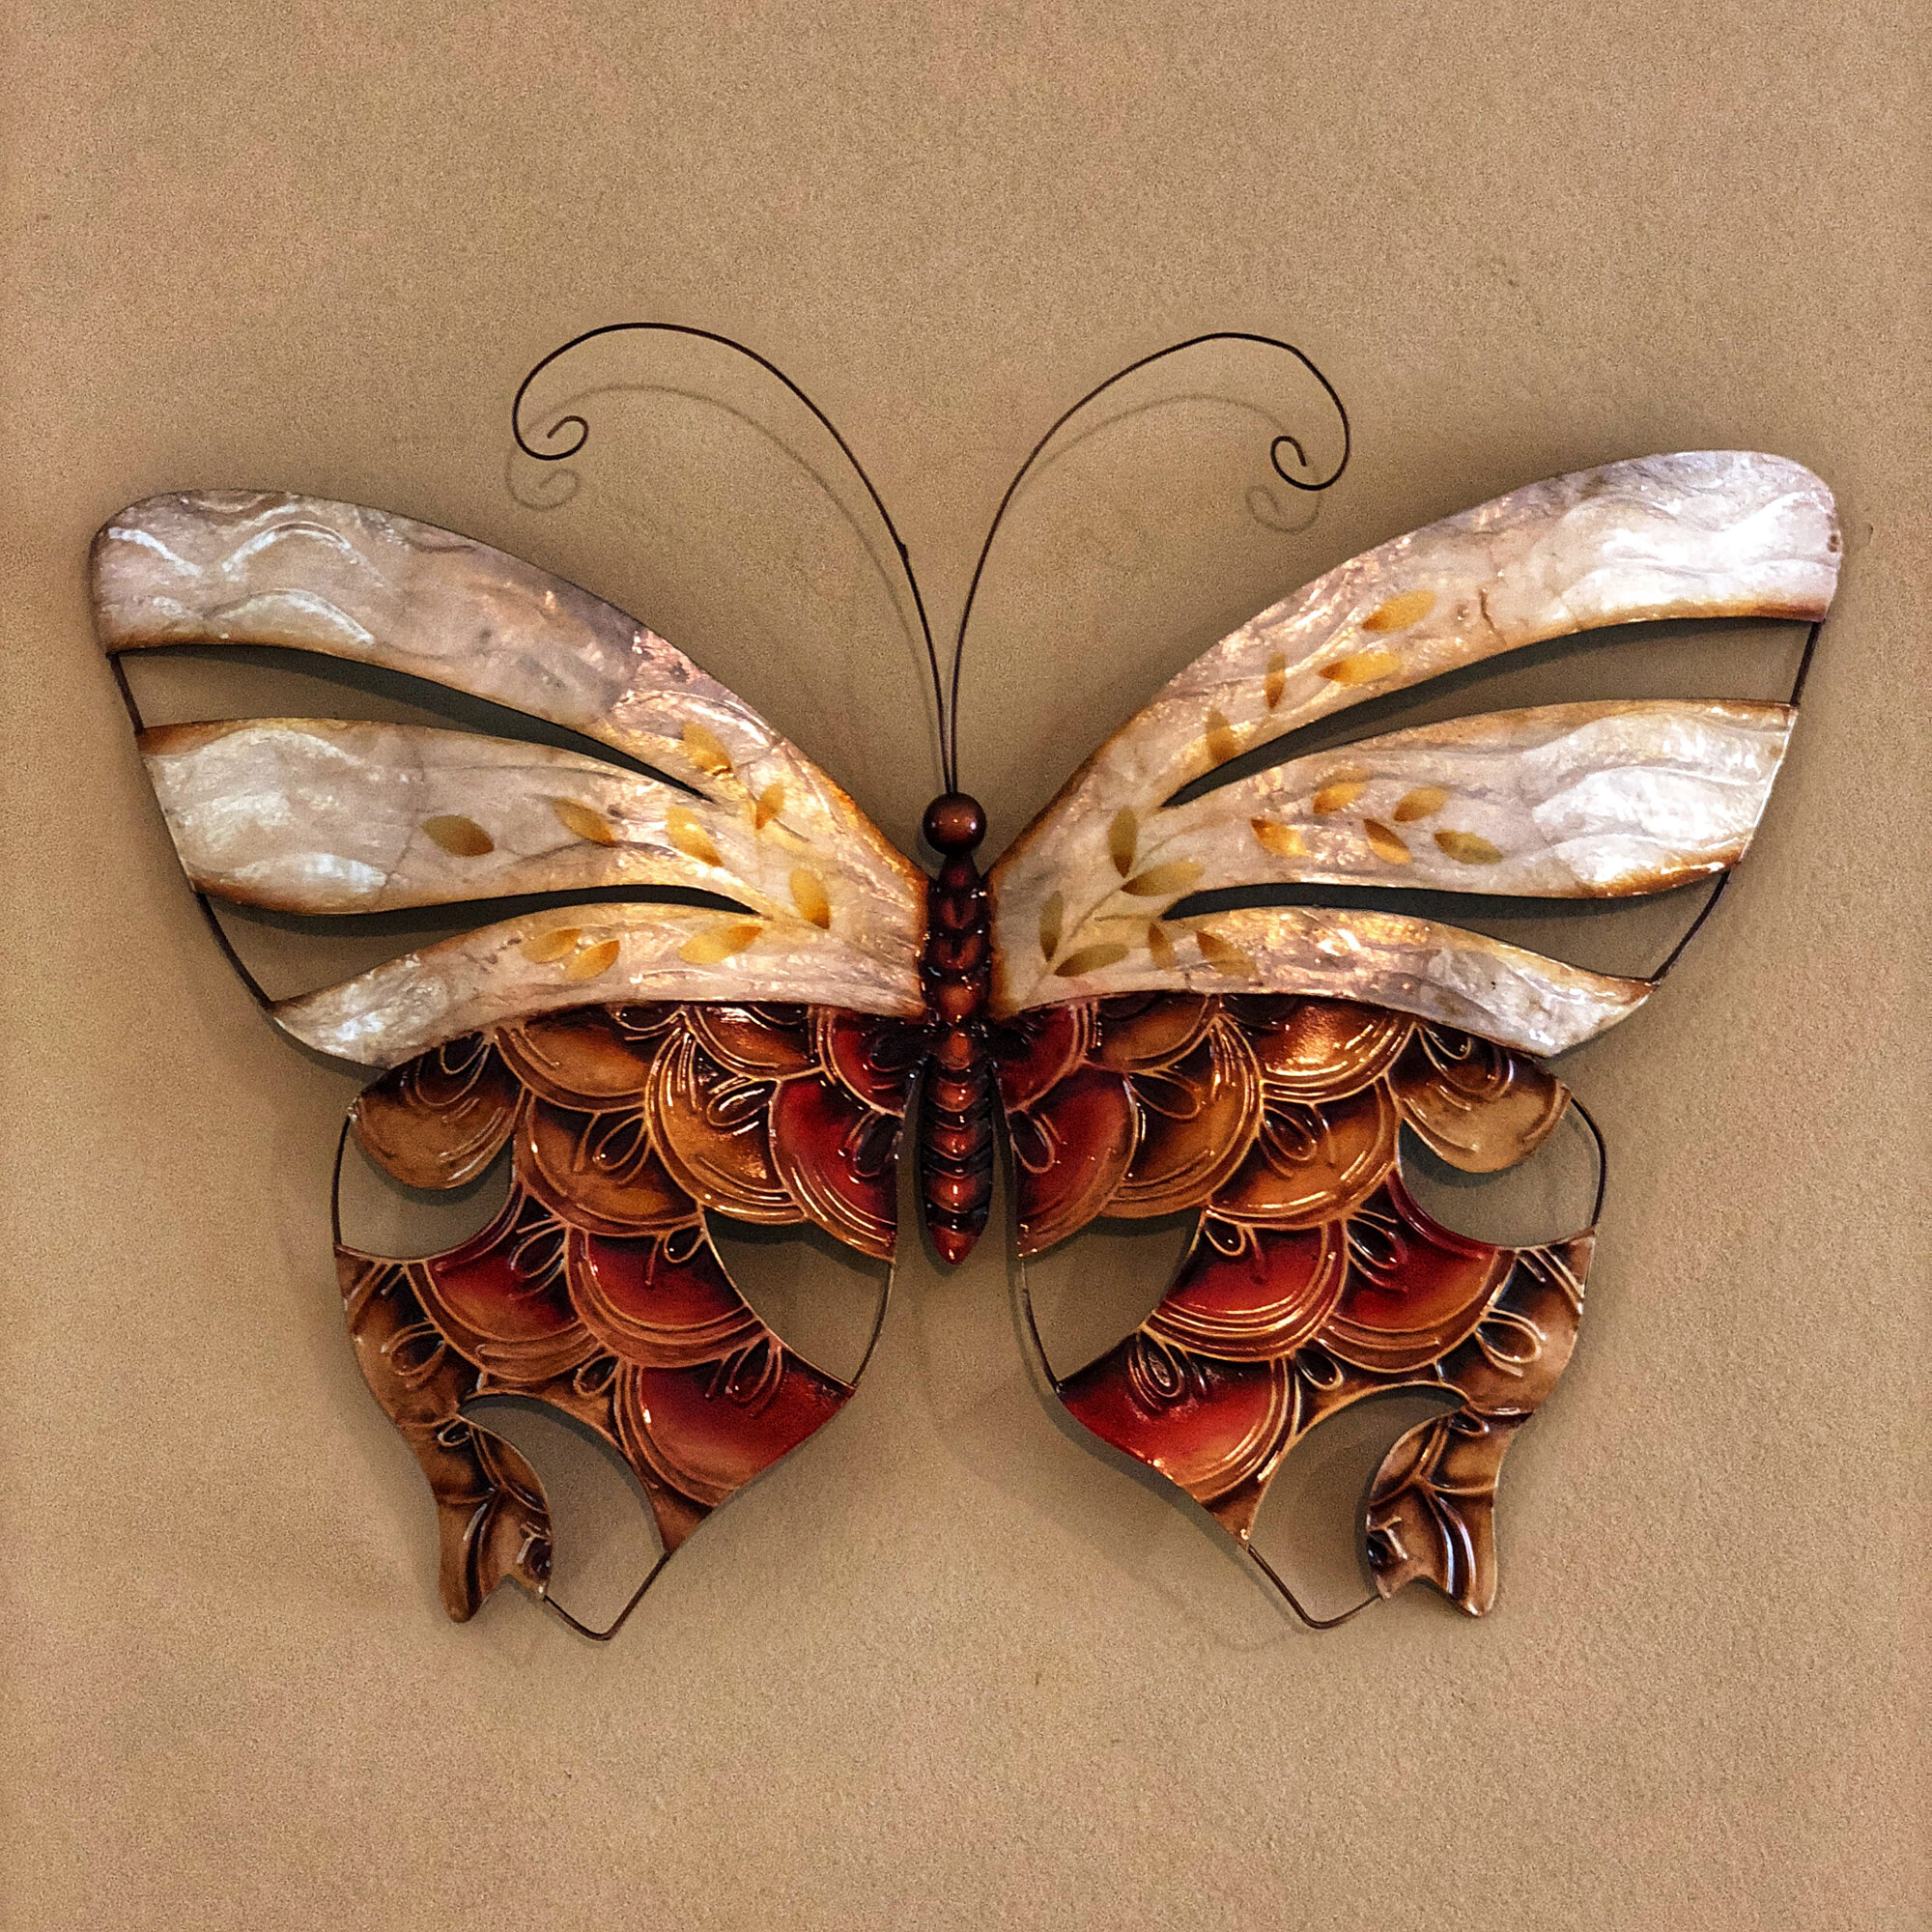 https://visualhunt.com/photos/11/metal-butterfly-with-pearl.jpg